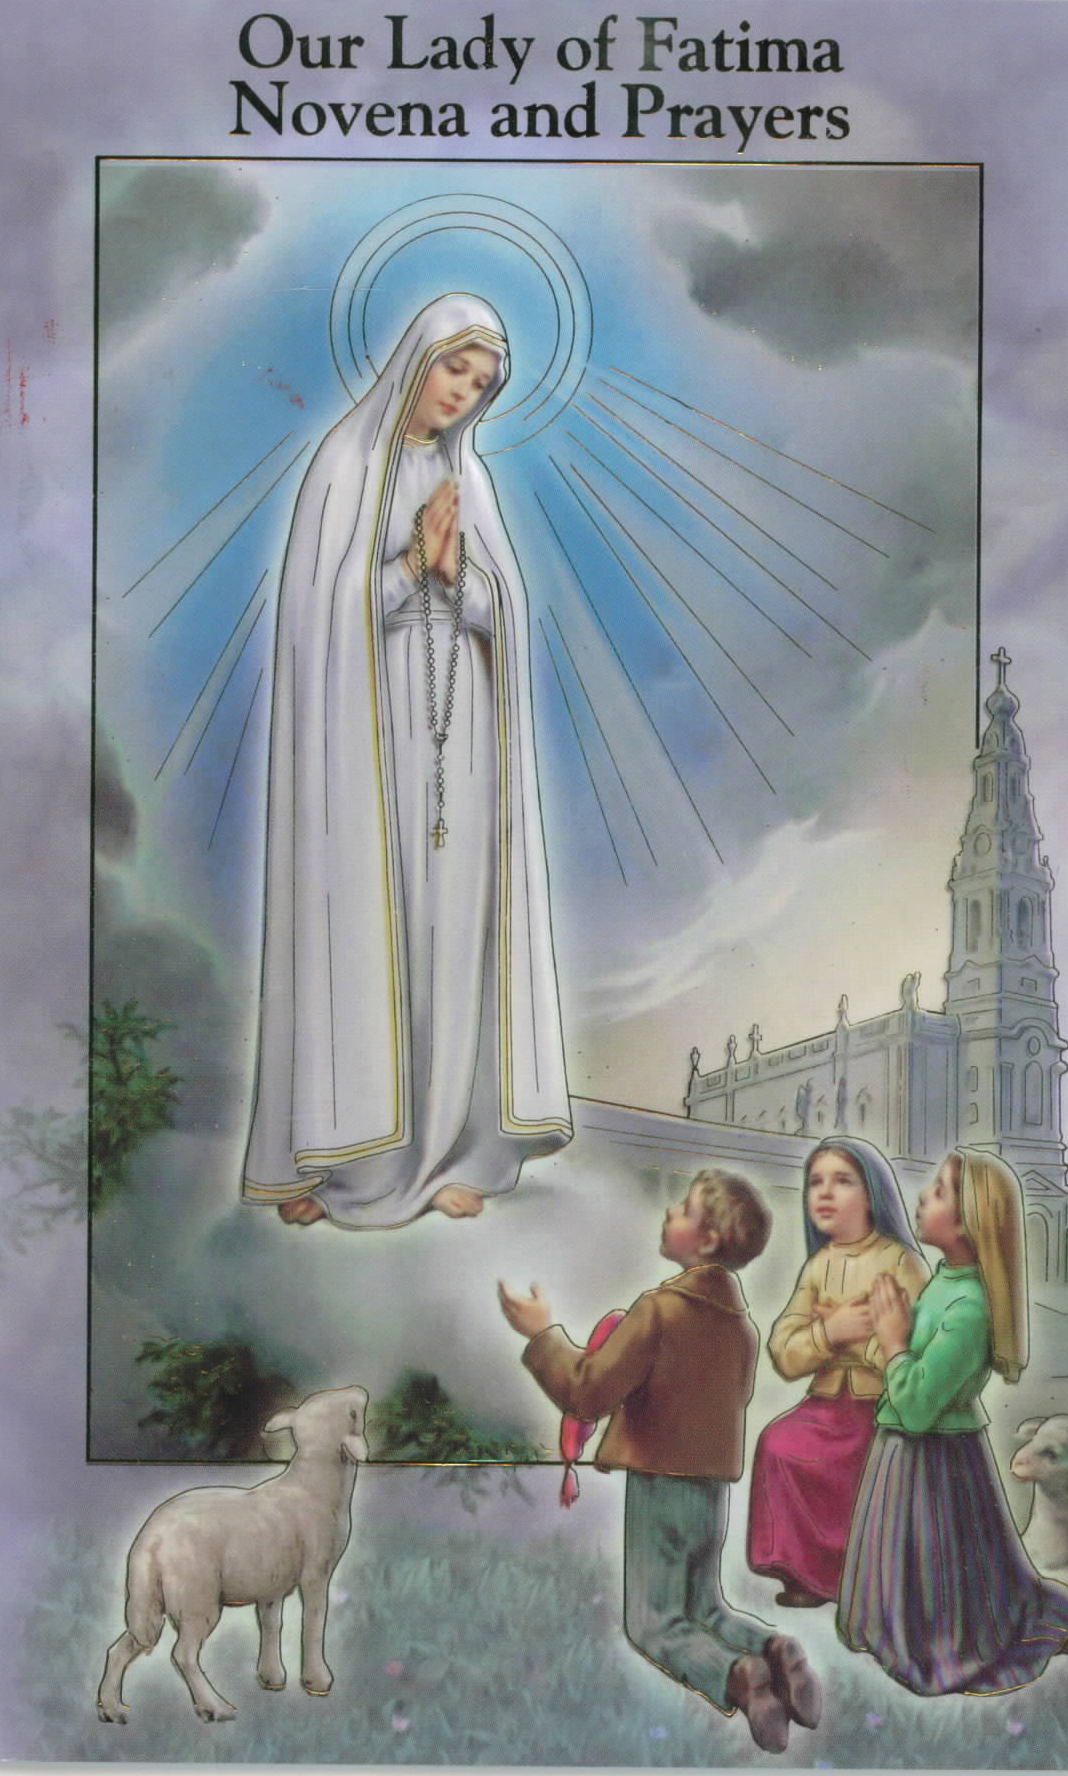 Our Lady of Fatima Novena and Prayers Prayer Book 12-2432-225 is 3.75" x 5-7/8" and 24 pages beautifully illustrated with Italian Fratelli-Bonella Artwork